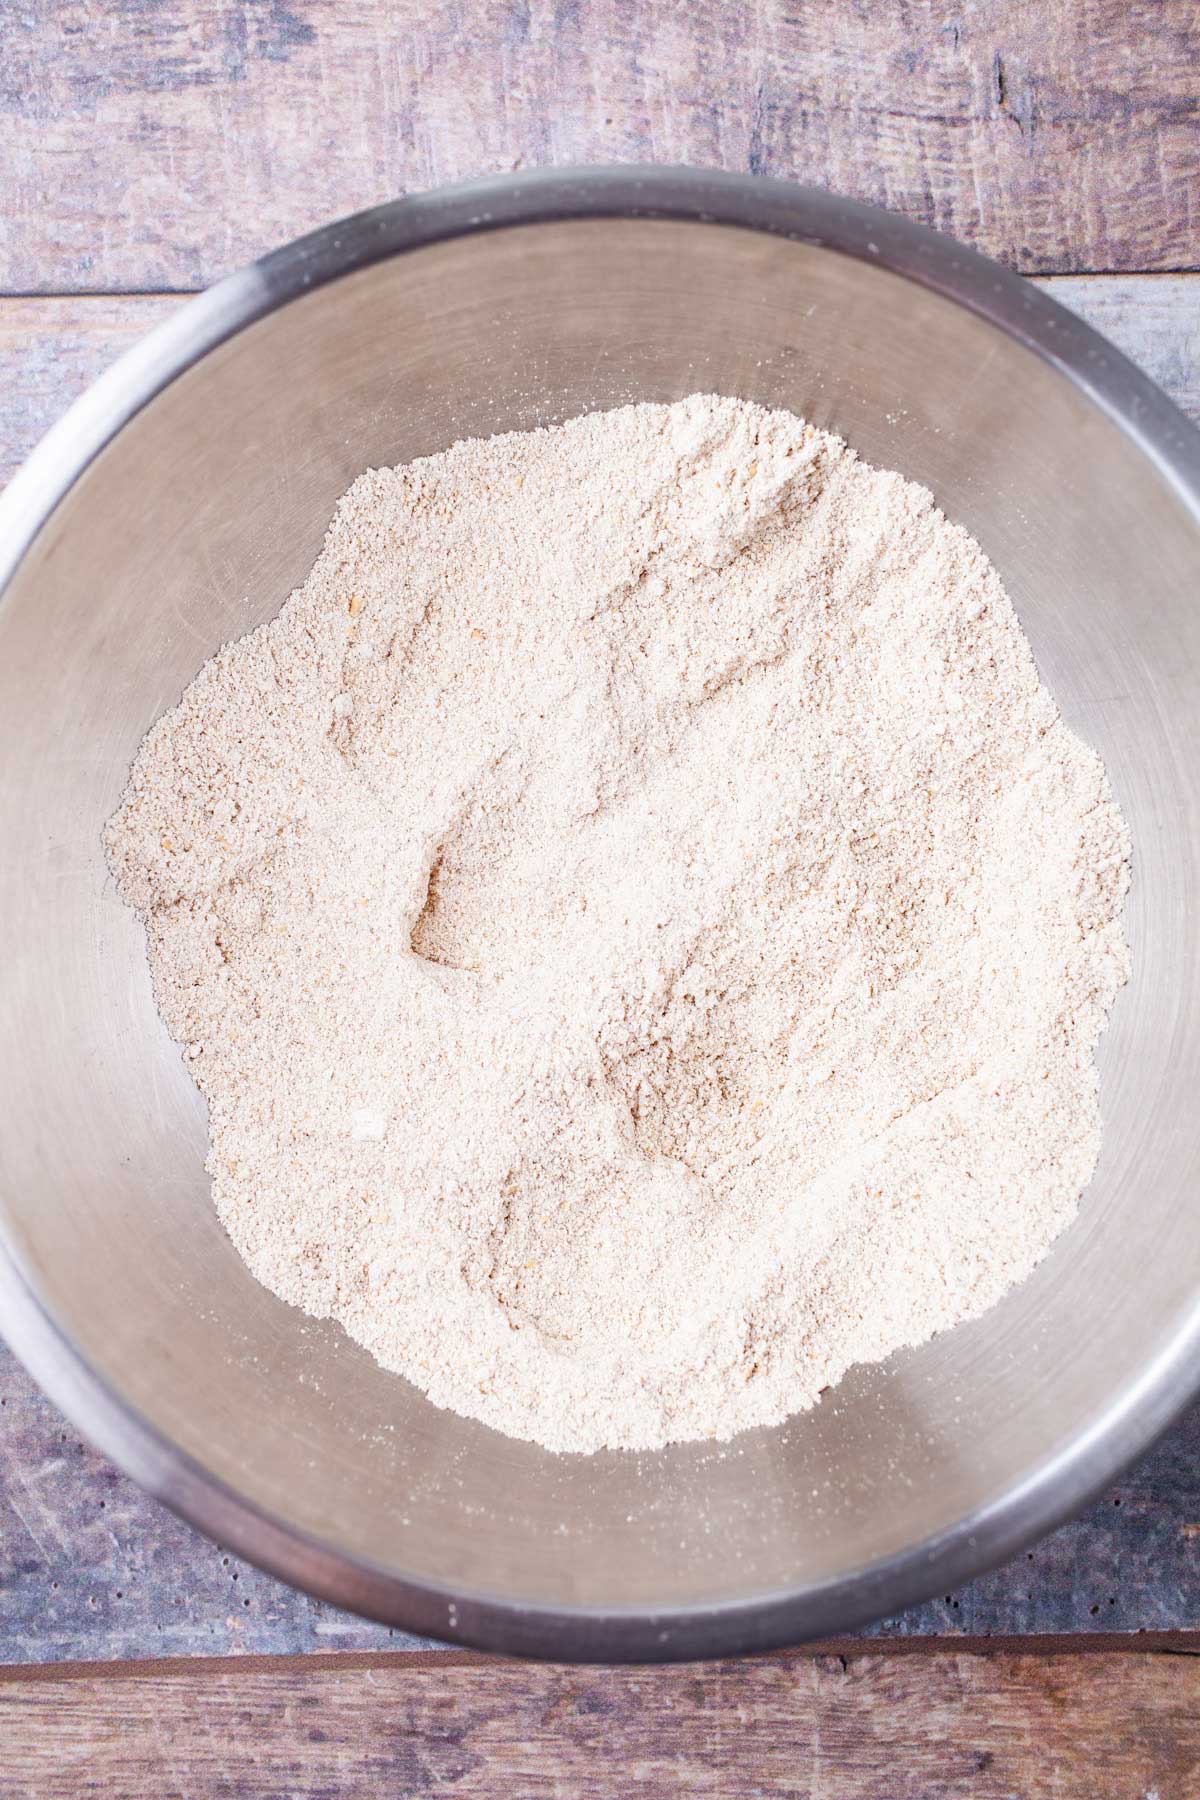 Oat flour in a stainless steel bowl.